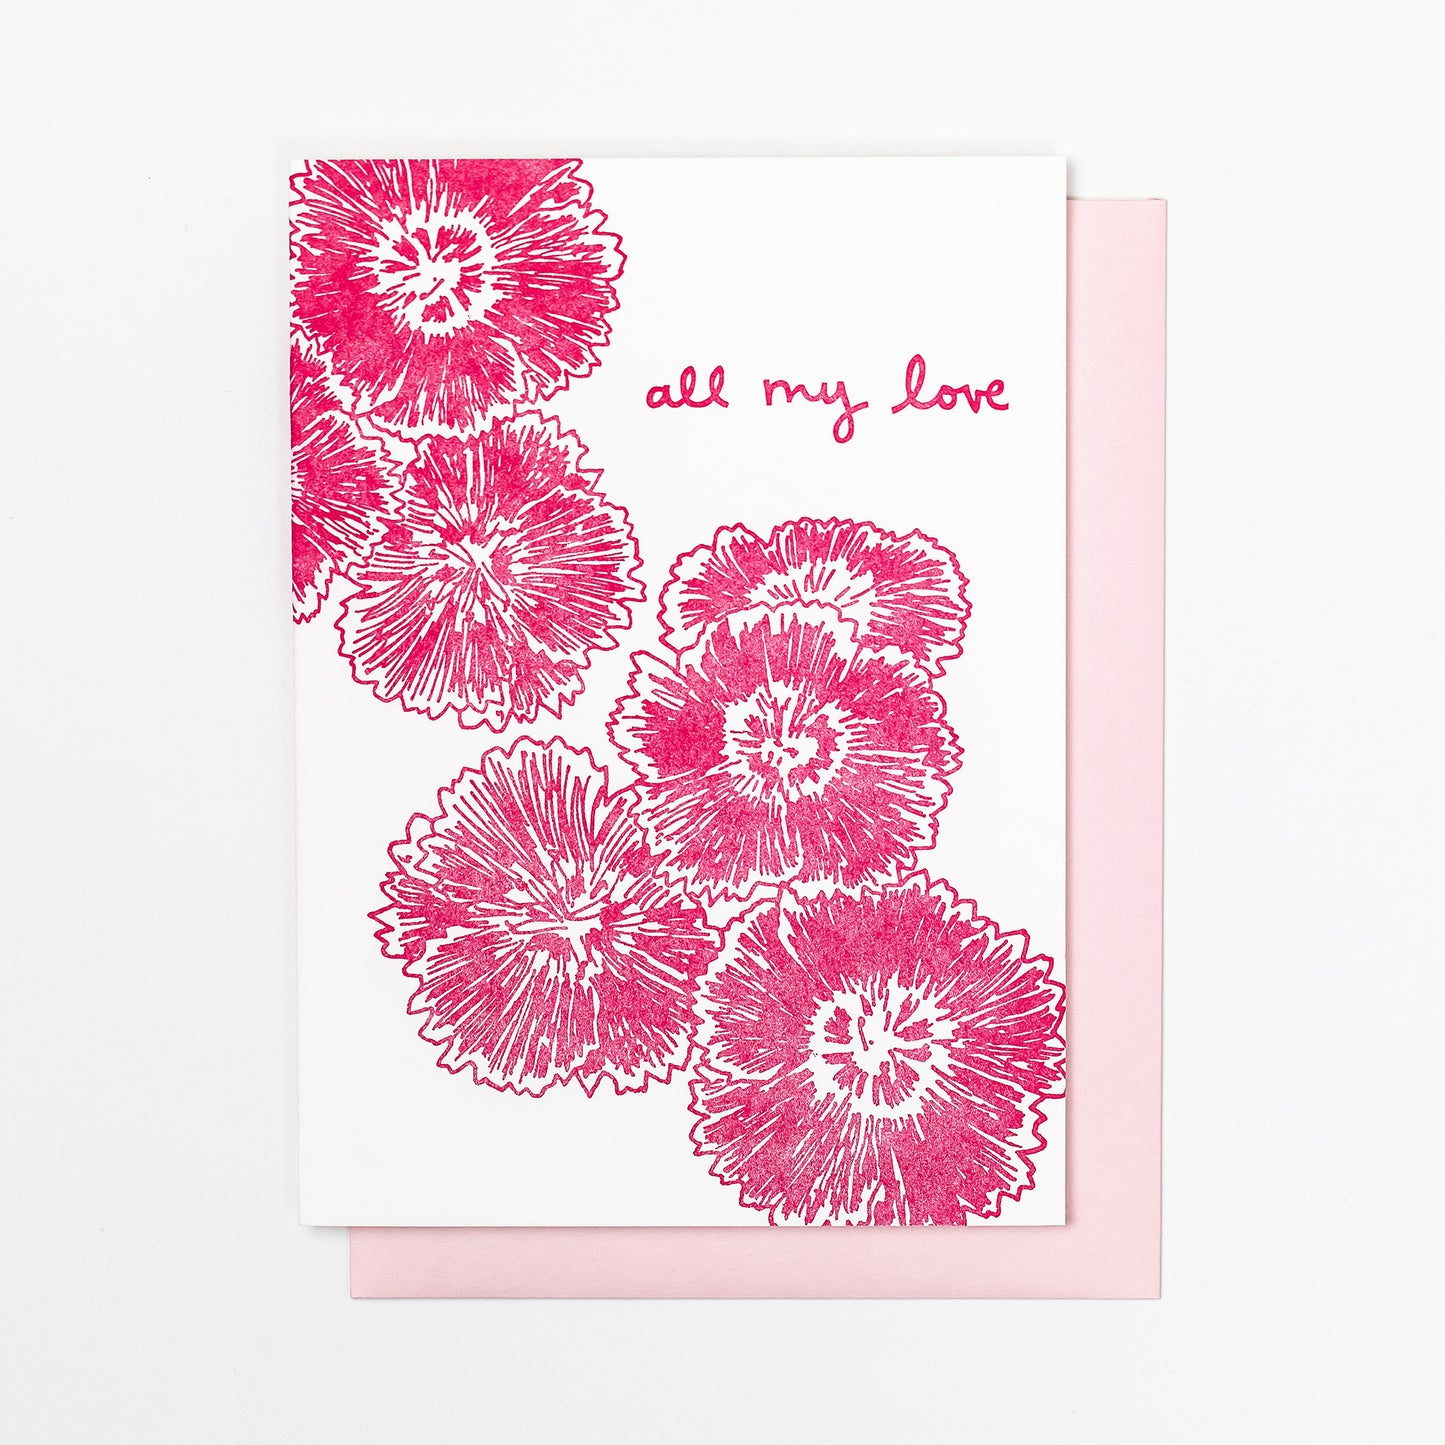 Letterpress greeting card featuring hand-drawn dianthus flowers, printed in a vibrant deep pink ink. The top right corner of the card says "all my love" in a whimsical hand-drawn text, in the same pink ink. The card is white, blank inside, and is paired with a light pink envelope.